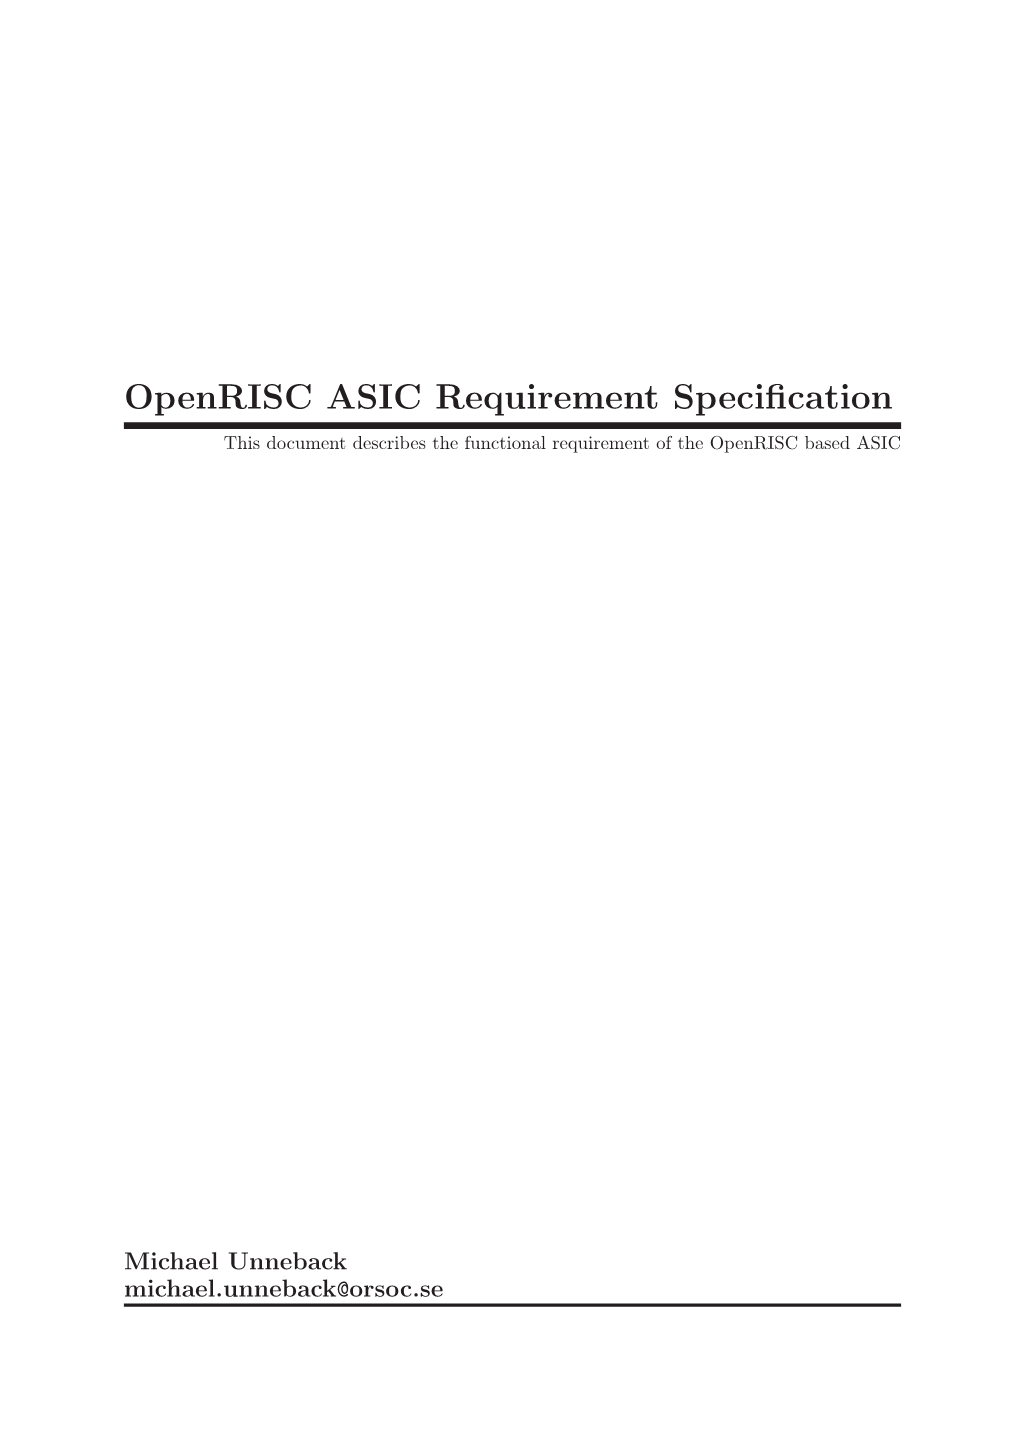 Openrisc ASIC Requirement Specification This Document Describes the Functional Requirement of the Openrisc Based ASIC